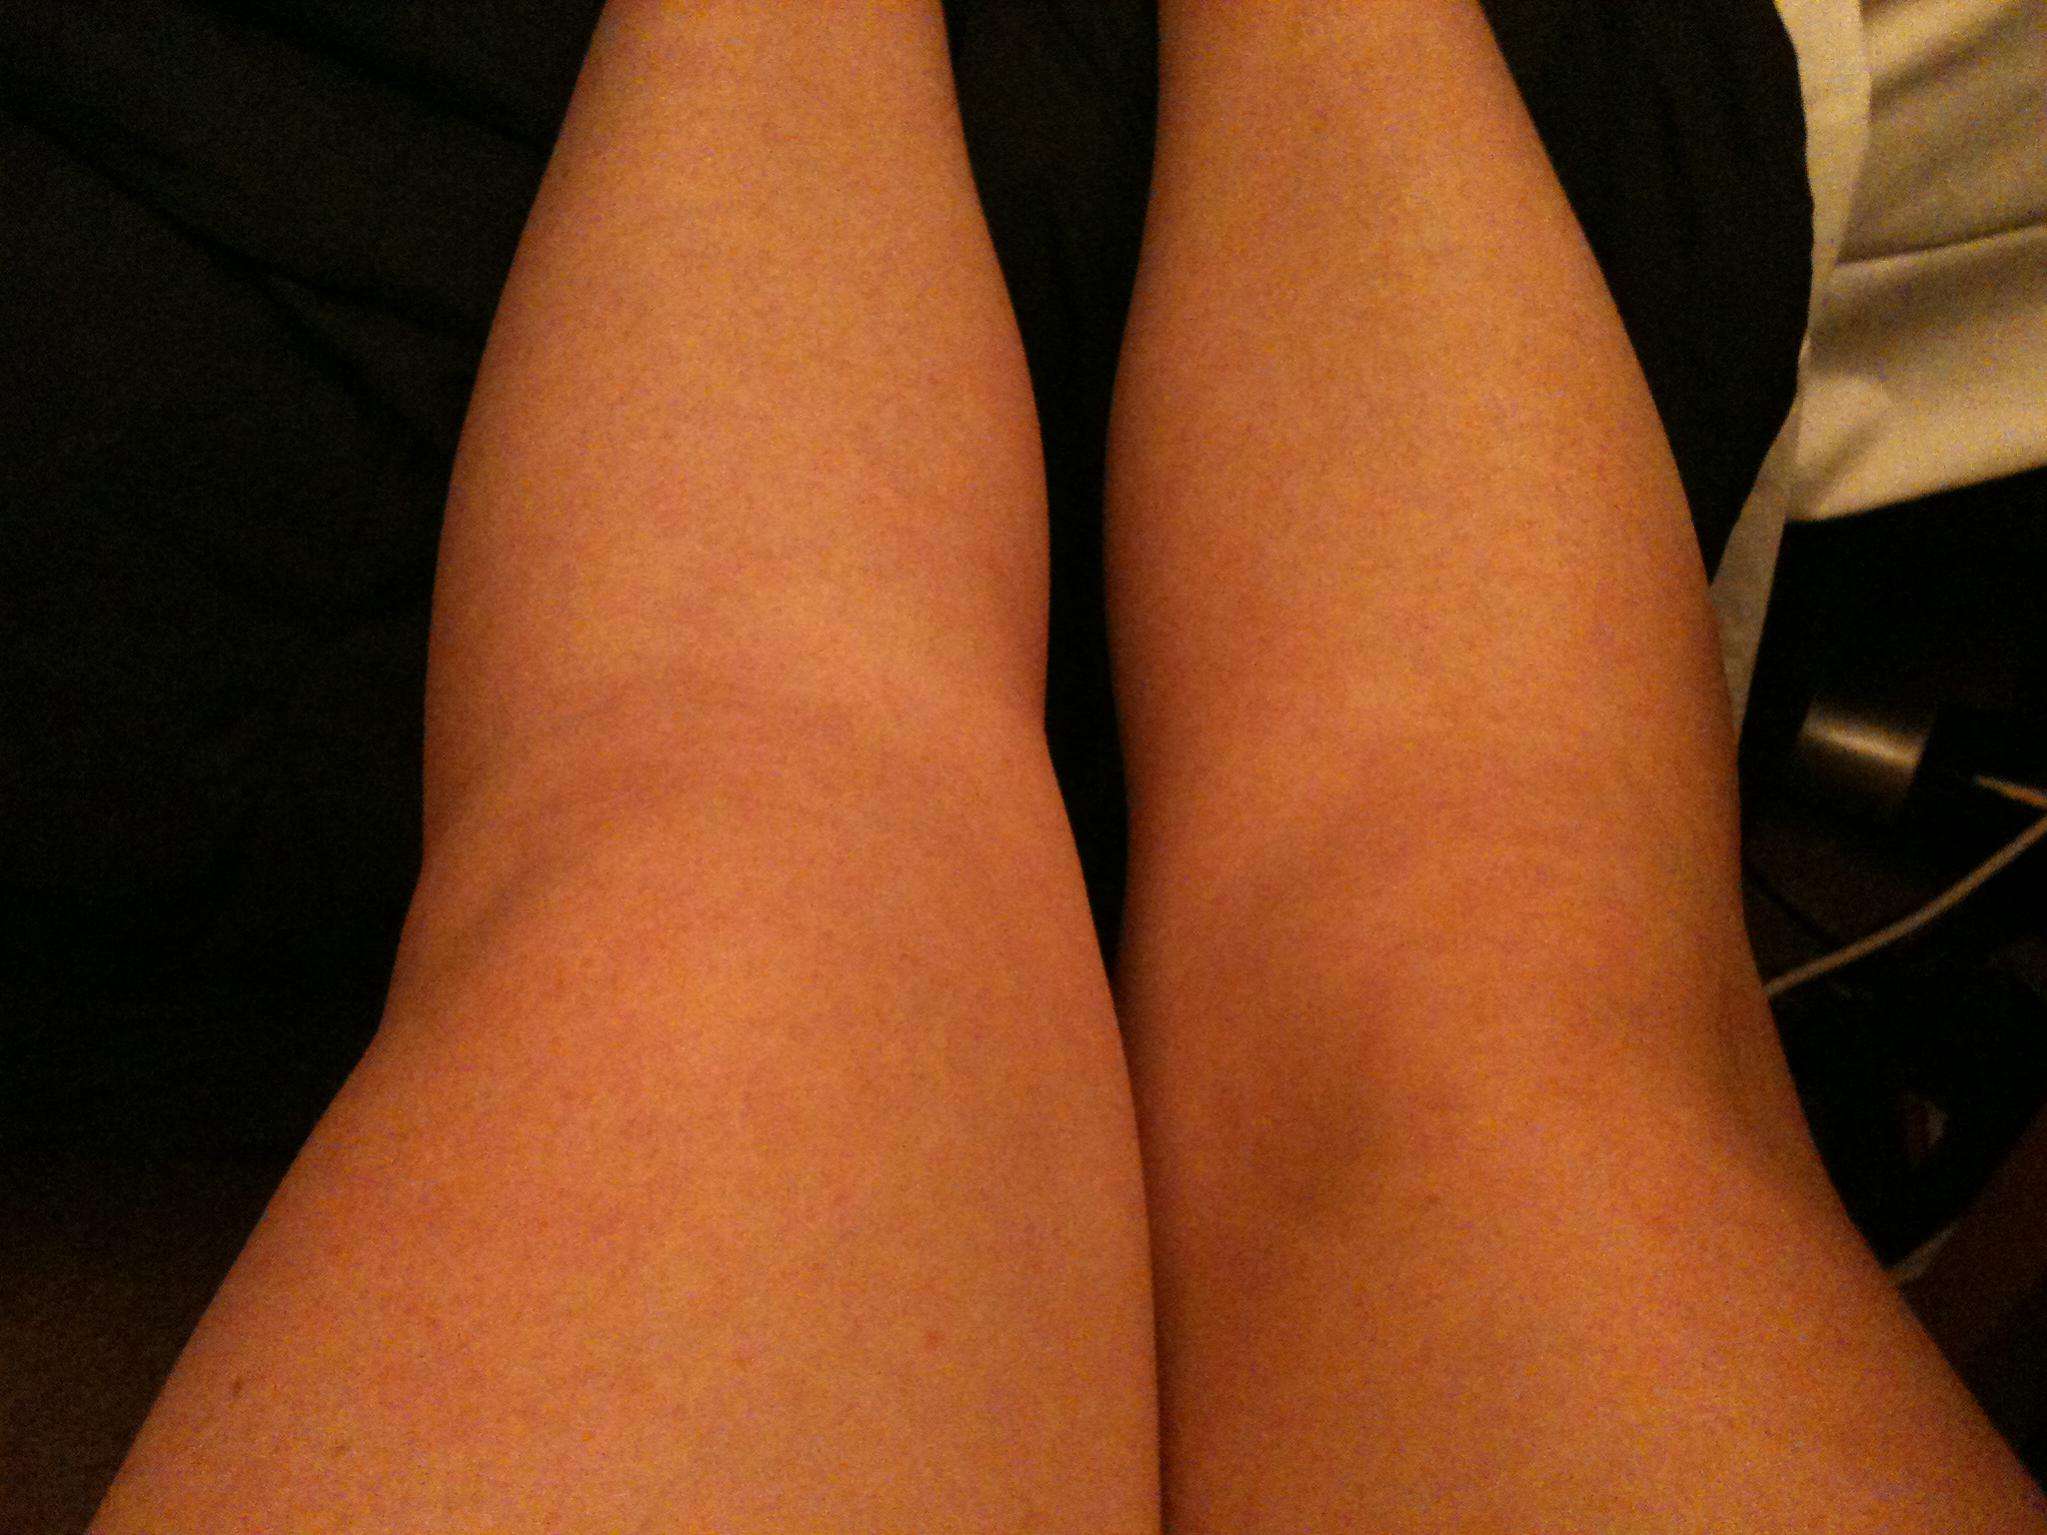 Knee effusion (swelling) help